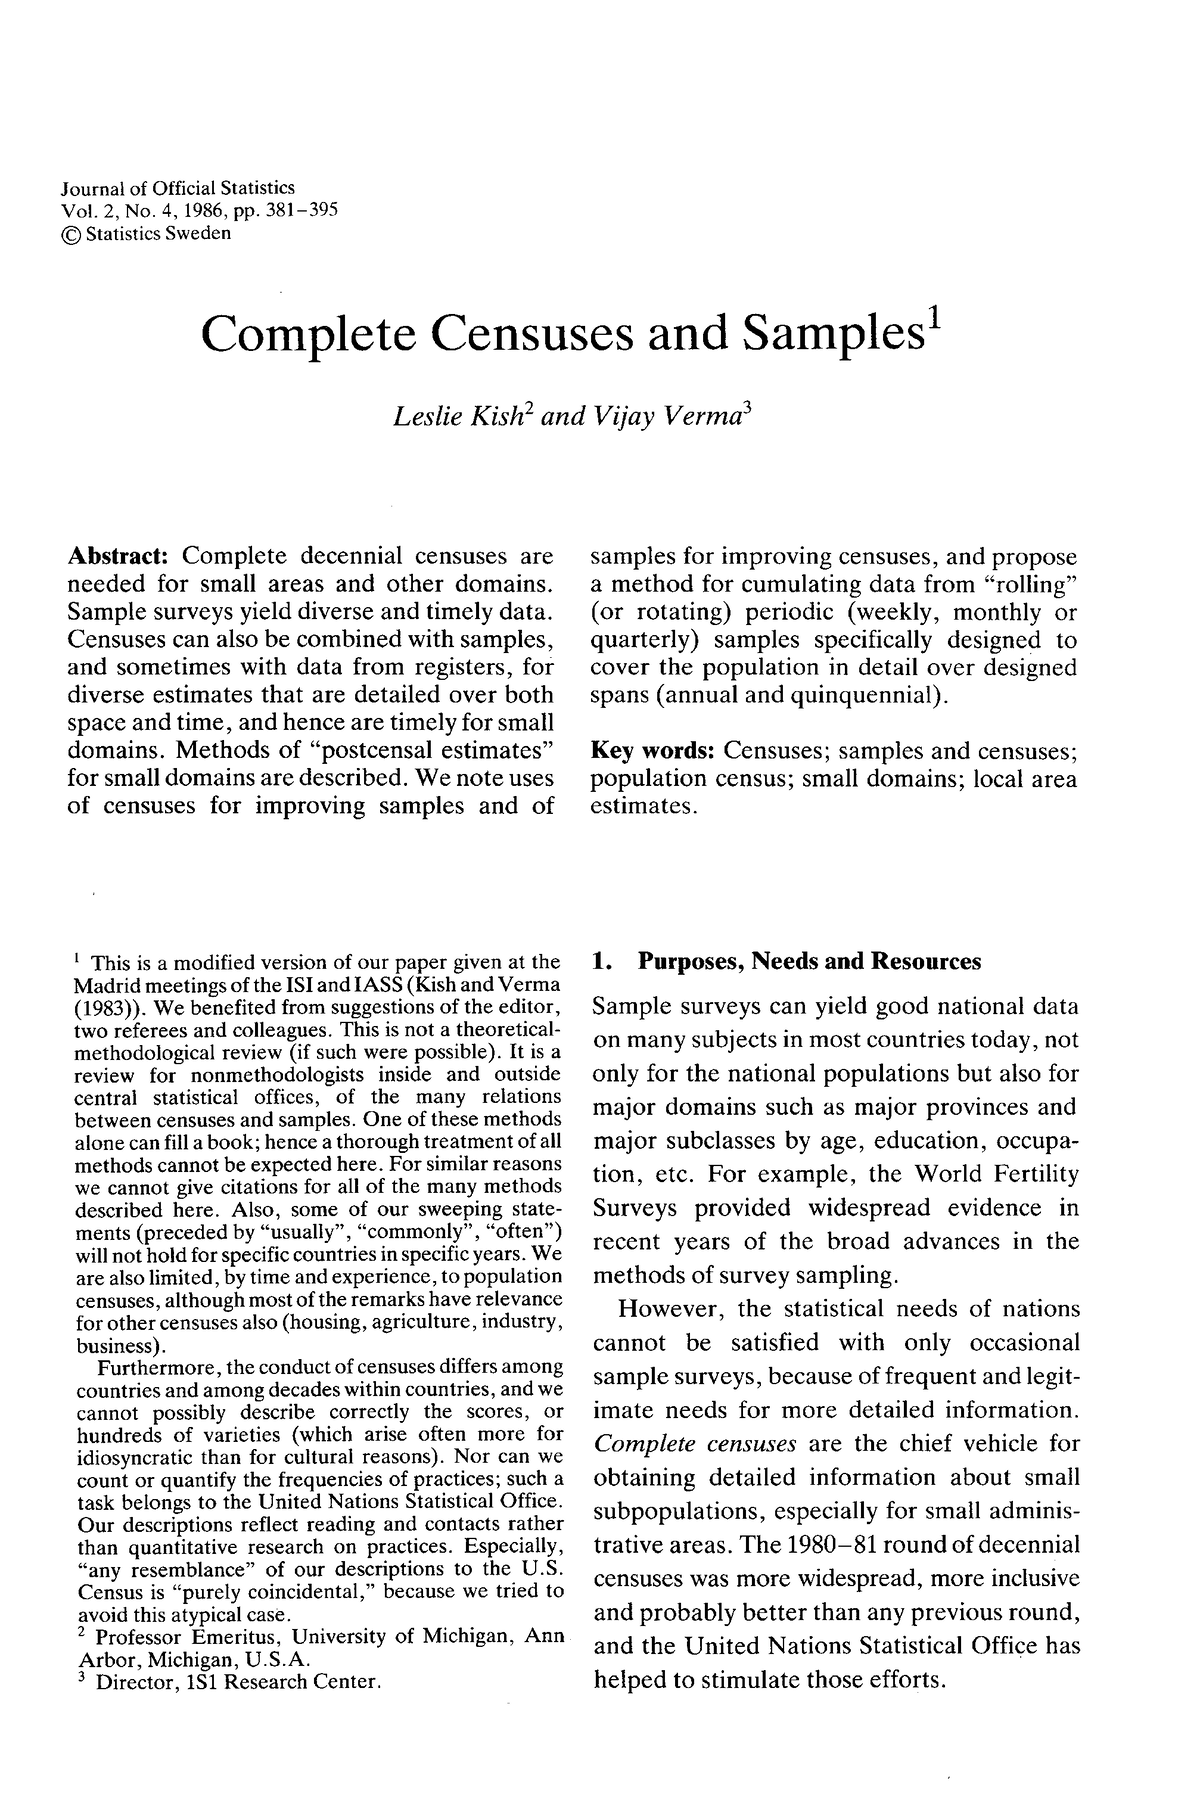 census in research methodology pdf